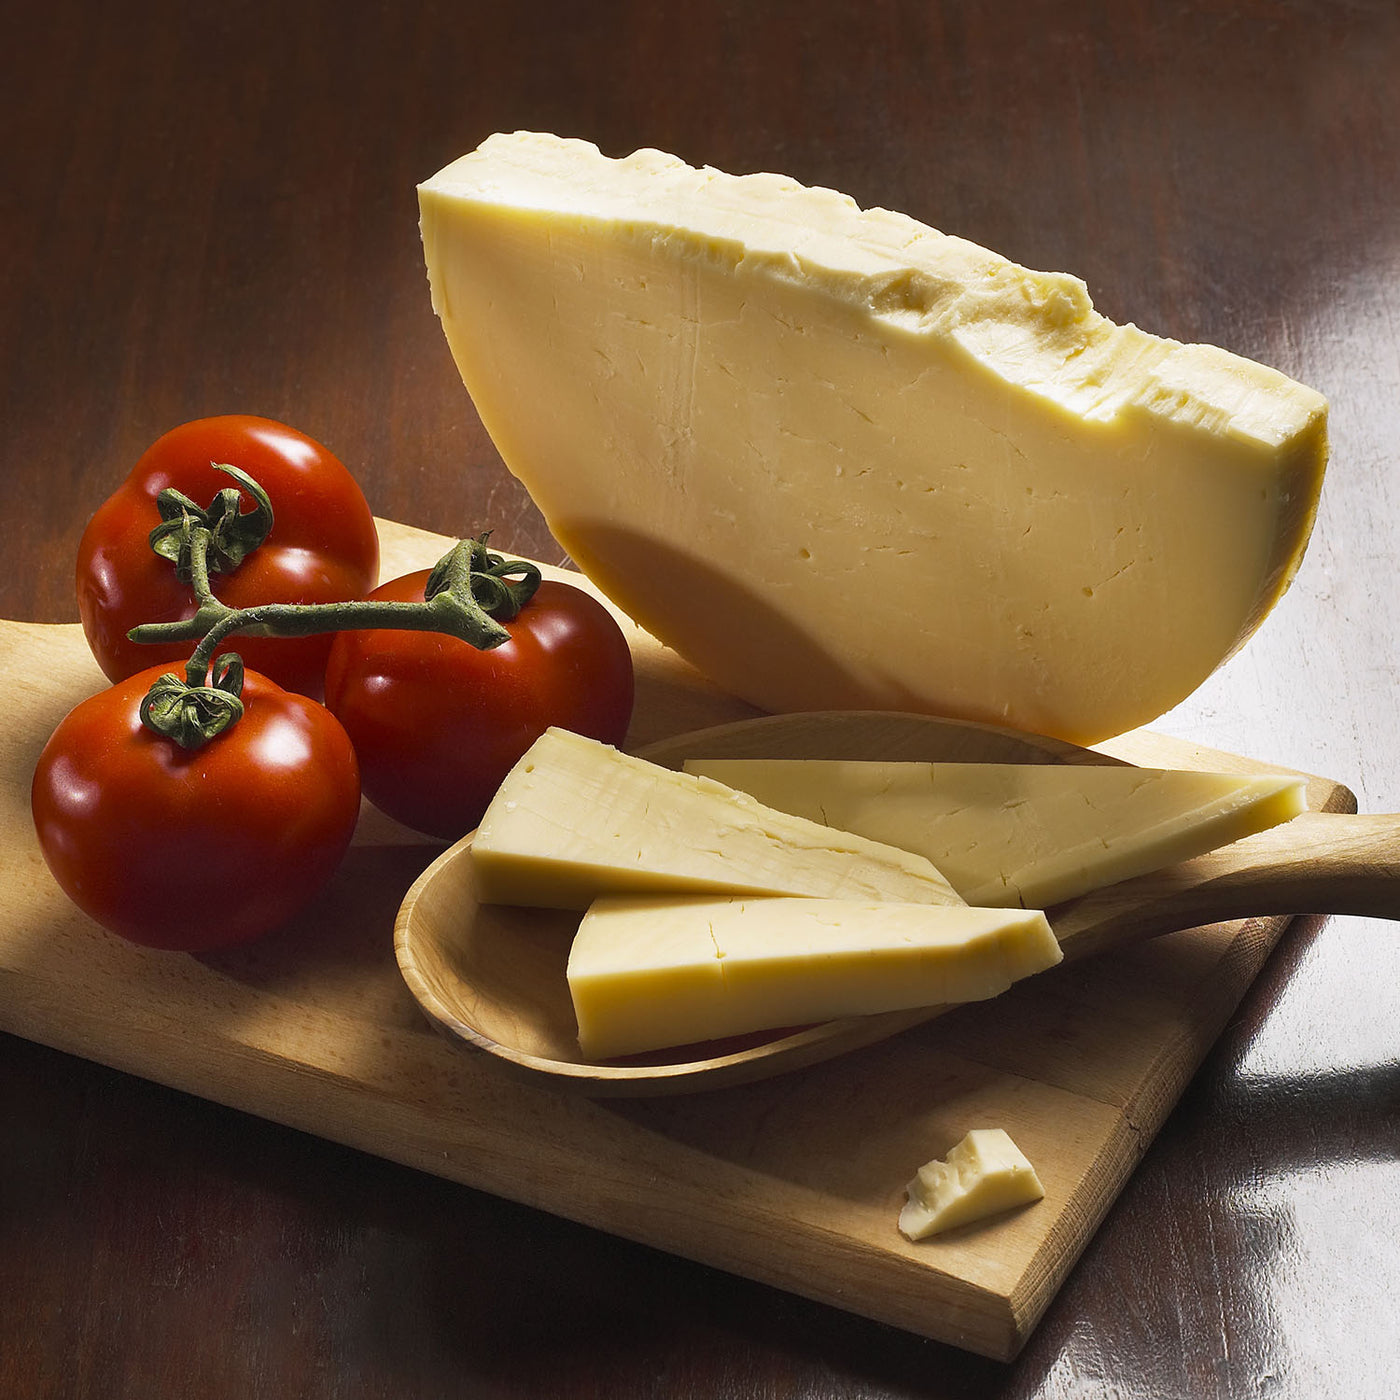 Dolceterra Italian Within US – Store DOP Provolone